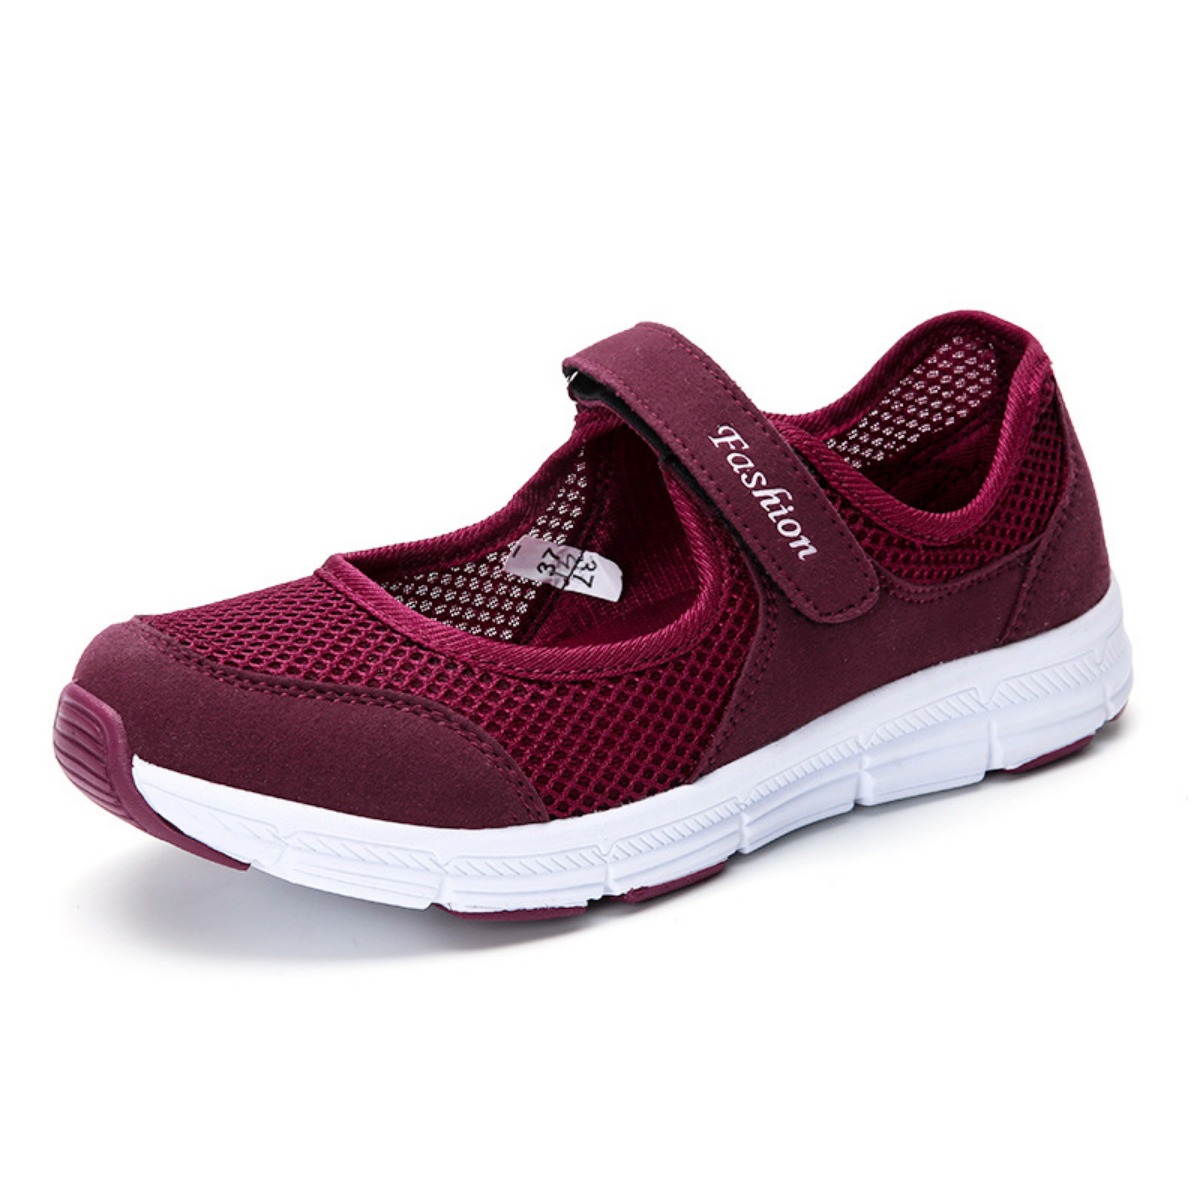 Womens Walking Shoes Wide Width Mary Jane Shoes Breathable Lightweight ...